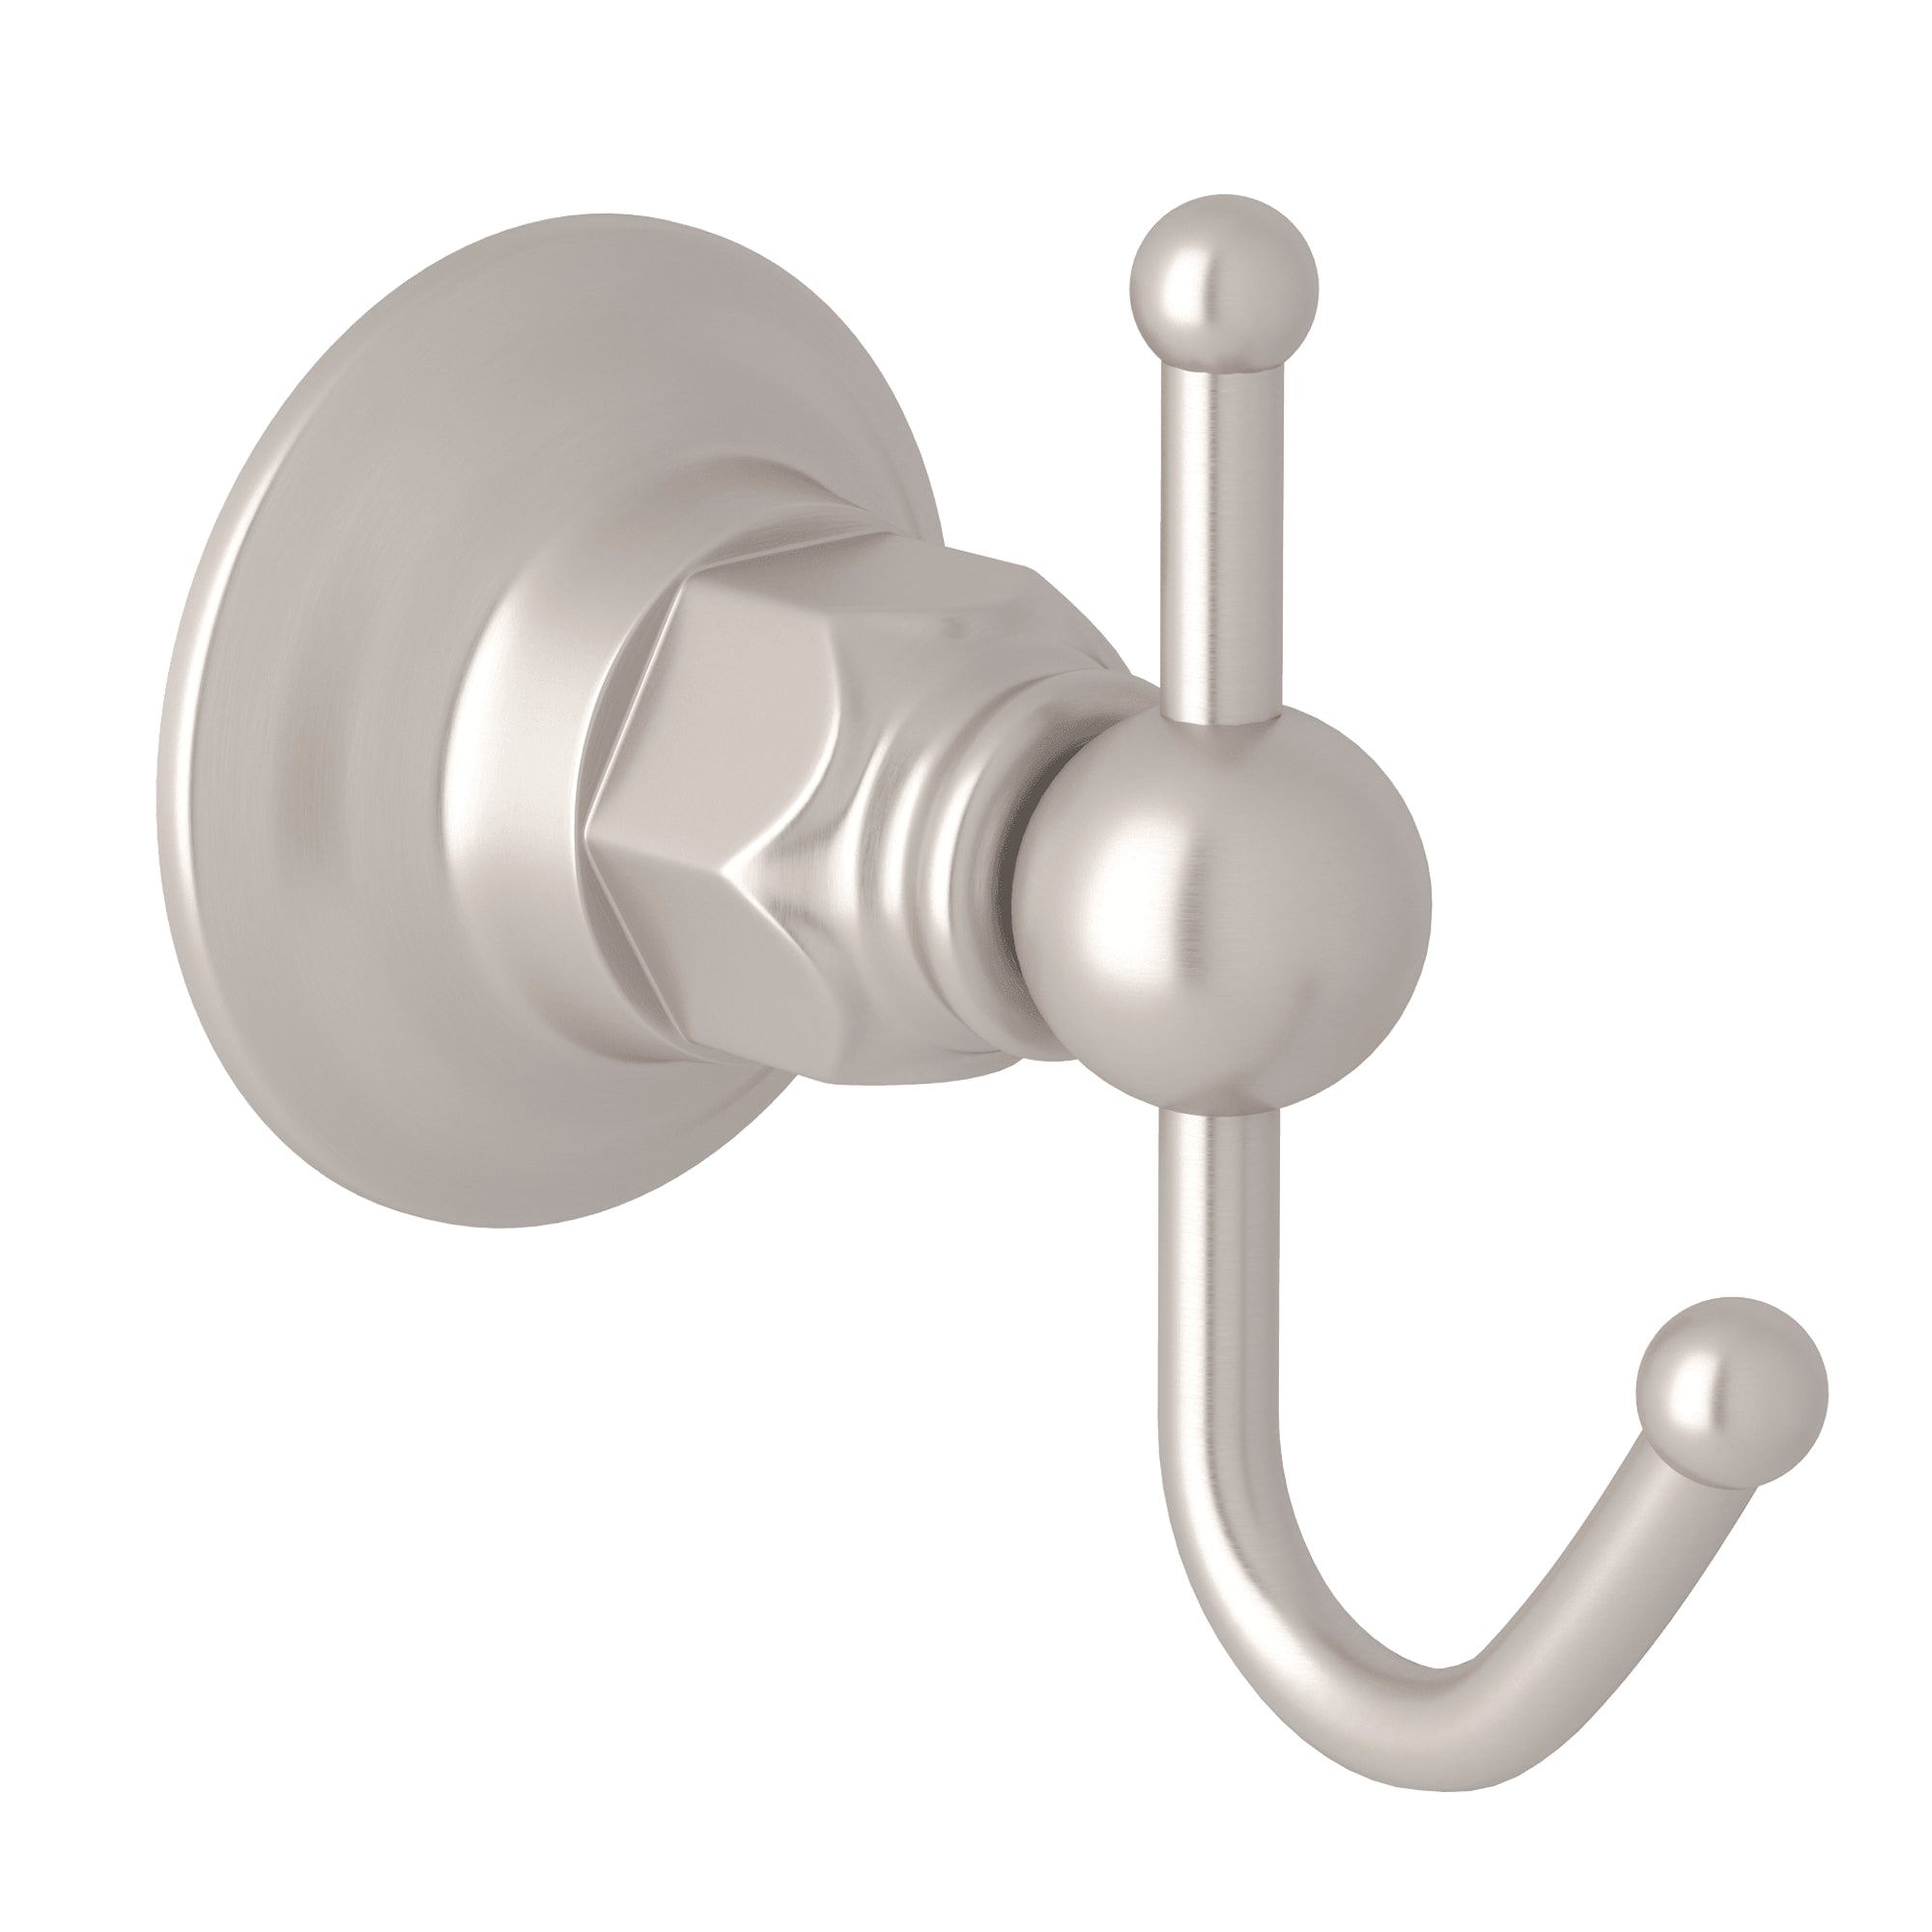 ROHL ROT7 Robe Hook